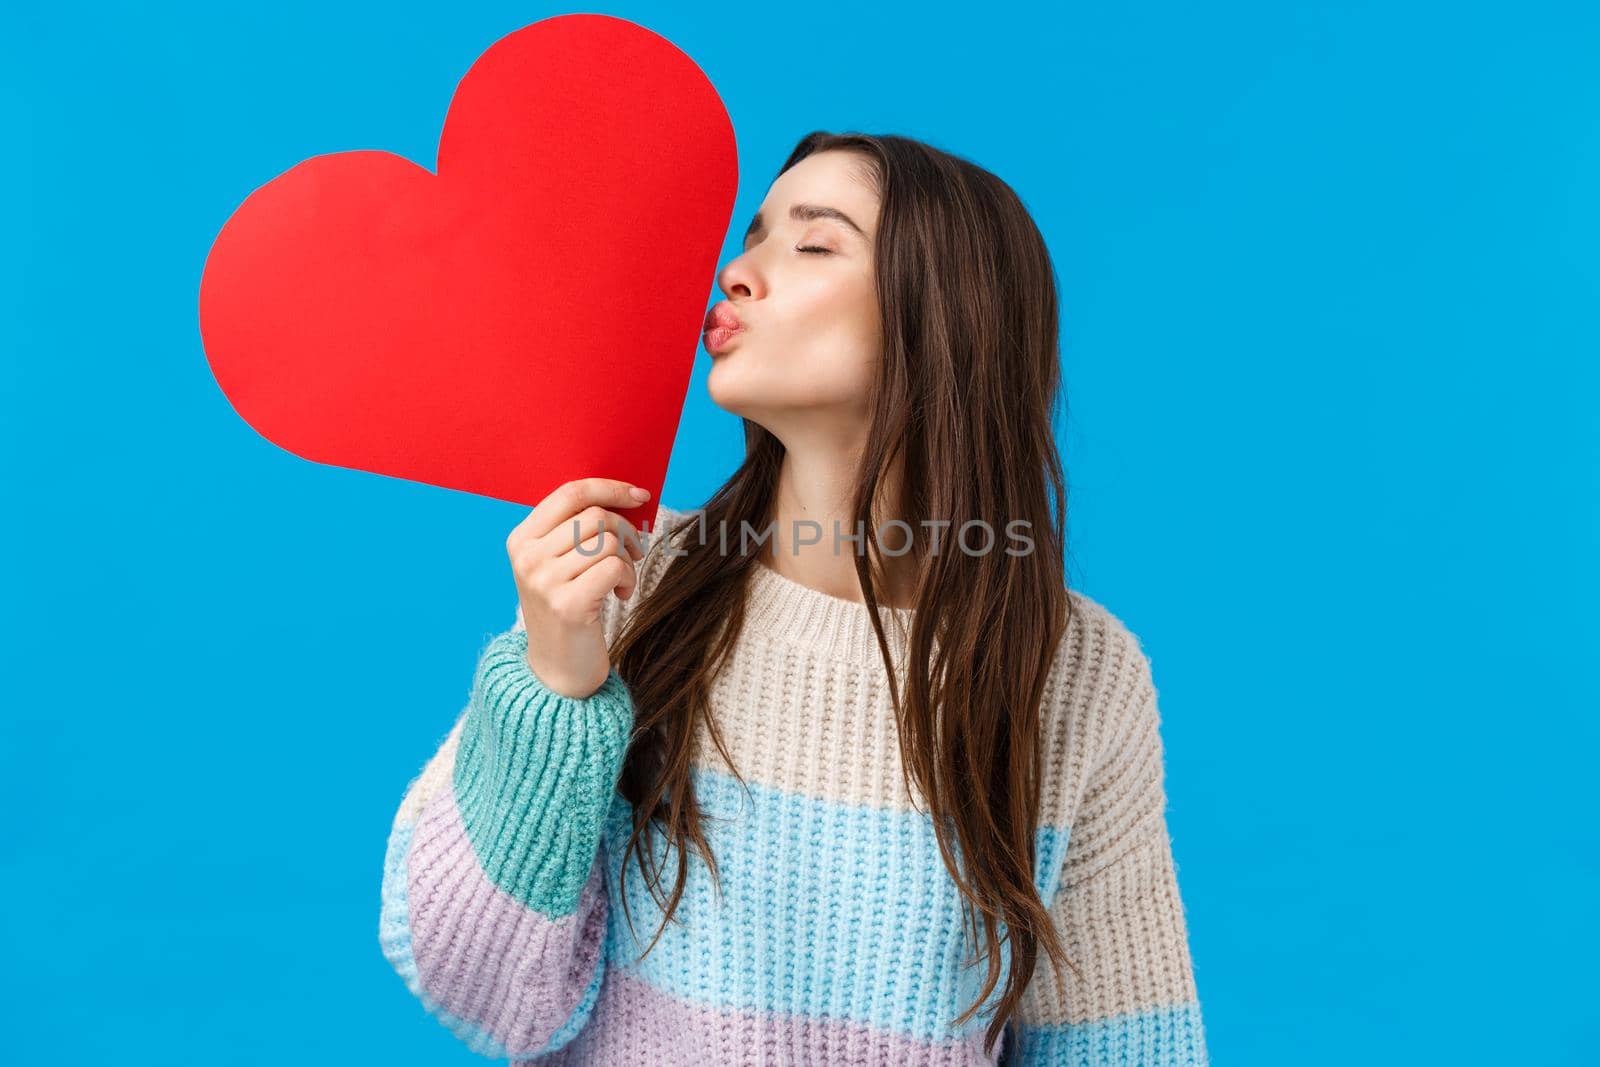 Romance, love and tenderness concept. Feminine cheerful and cute brunette woman showing her feelings, kissing big red heart card with closed eyes, express sympathy and care, blue background.